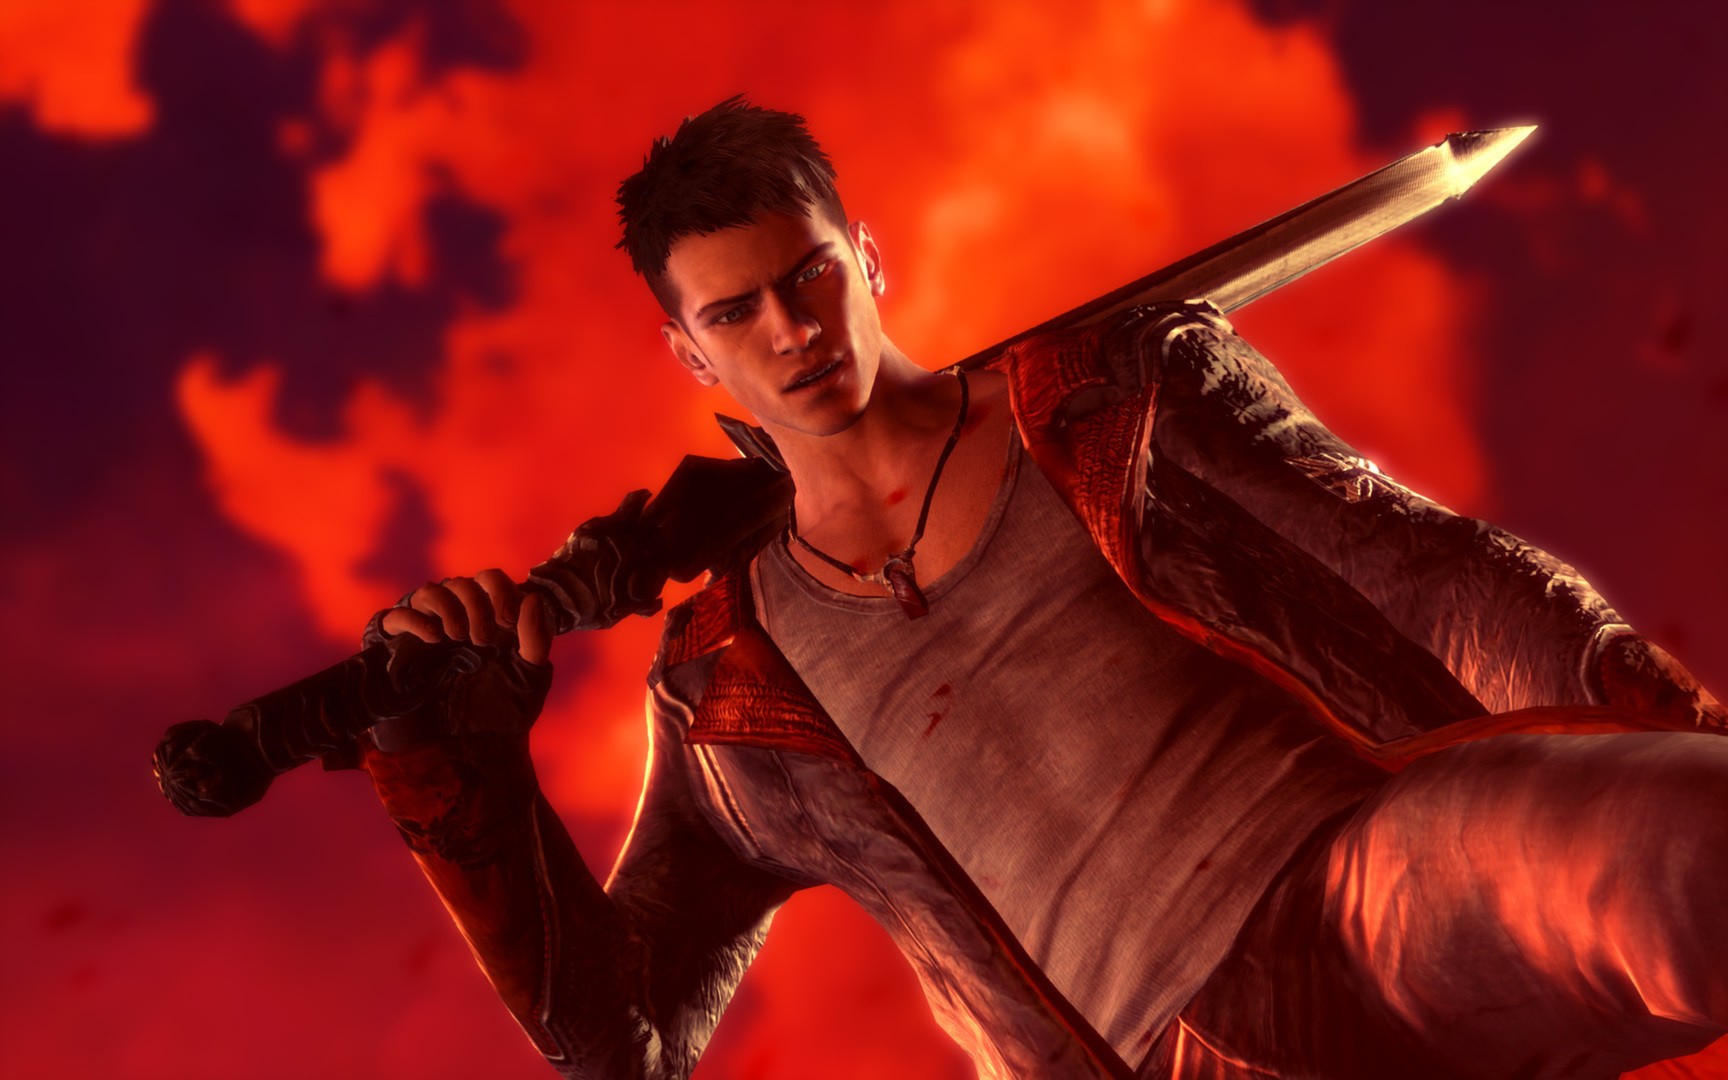 Devil May Cry 5, gamezone, ninja Theory, tokyo Game Show, devil